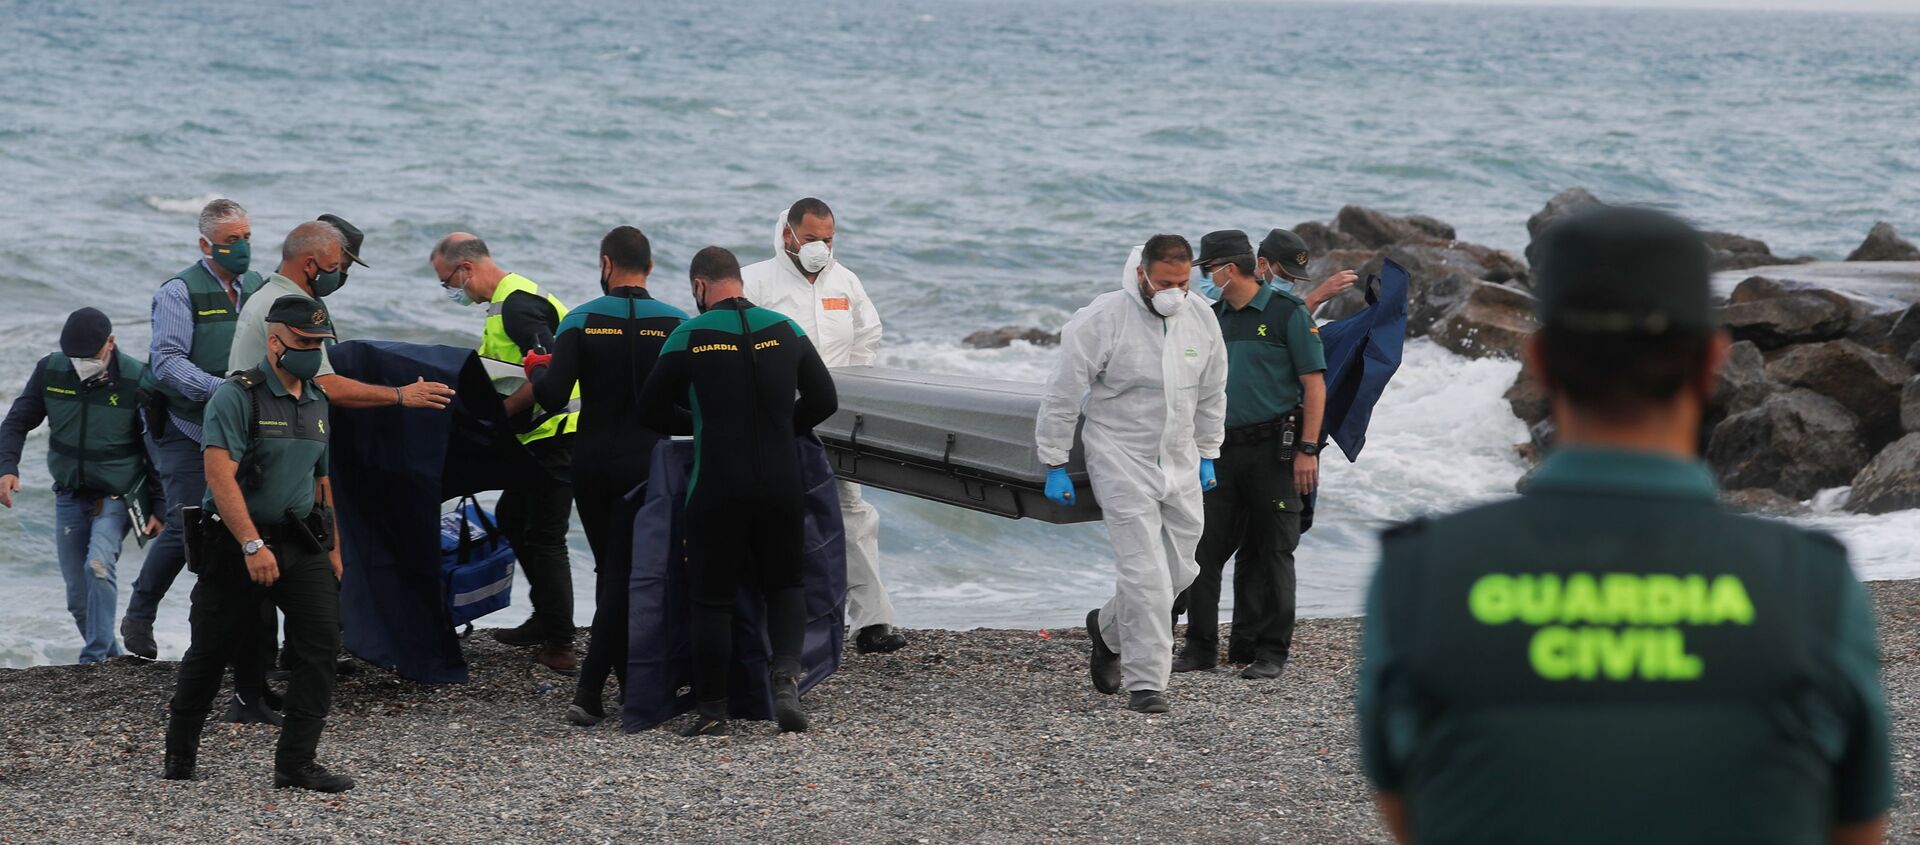 Workers carry a coffin containing a body at the shore near the Spanish-Moroccan border at El Tarajal Beach, after thousands of migrants swam across this border during the last days, in Ceuta, Spain, May 20, 2021 - Sputnik International, 1920, 31.05.2021